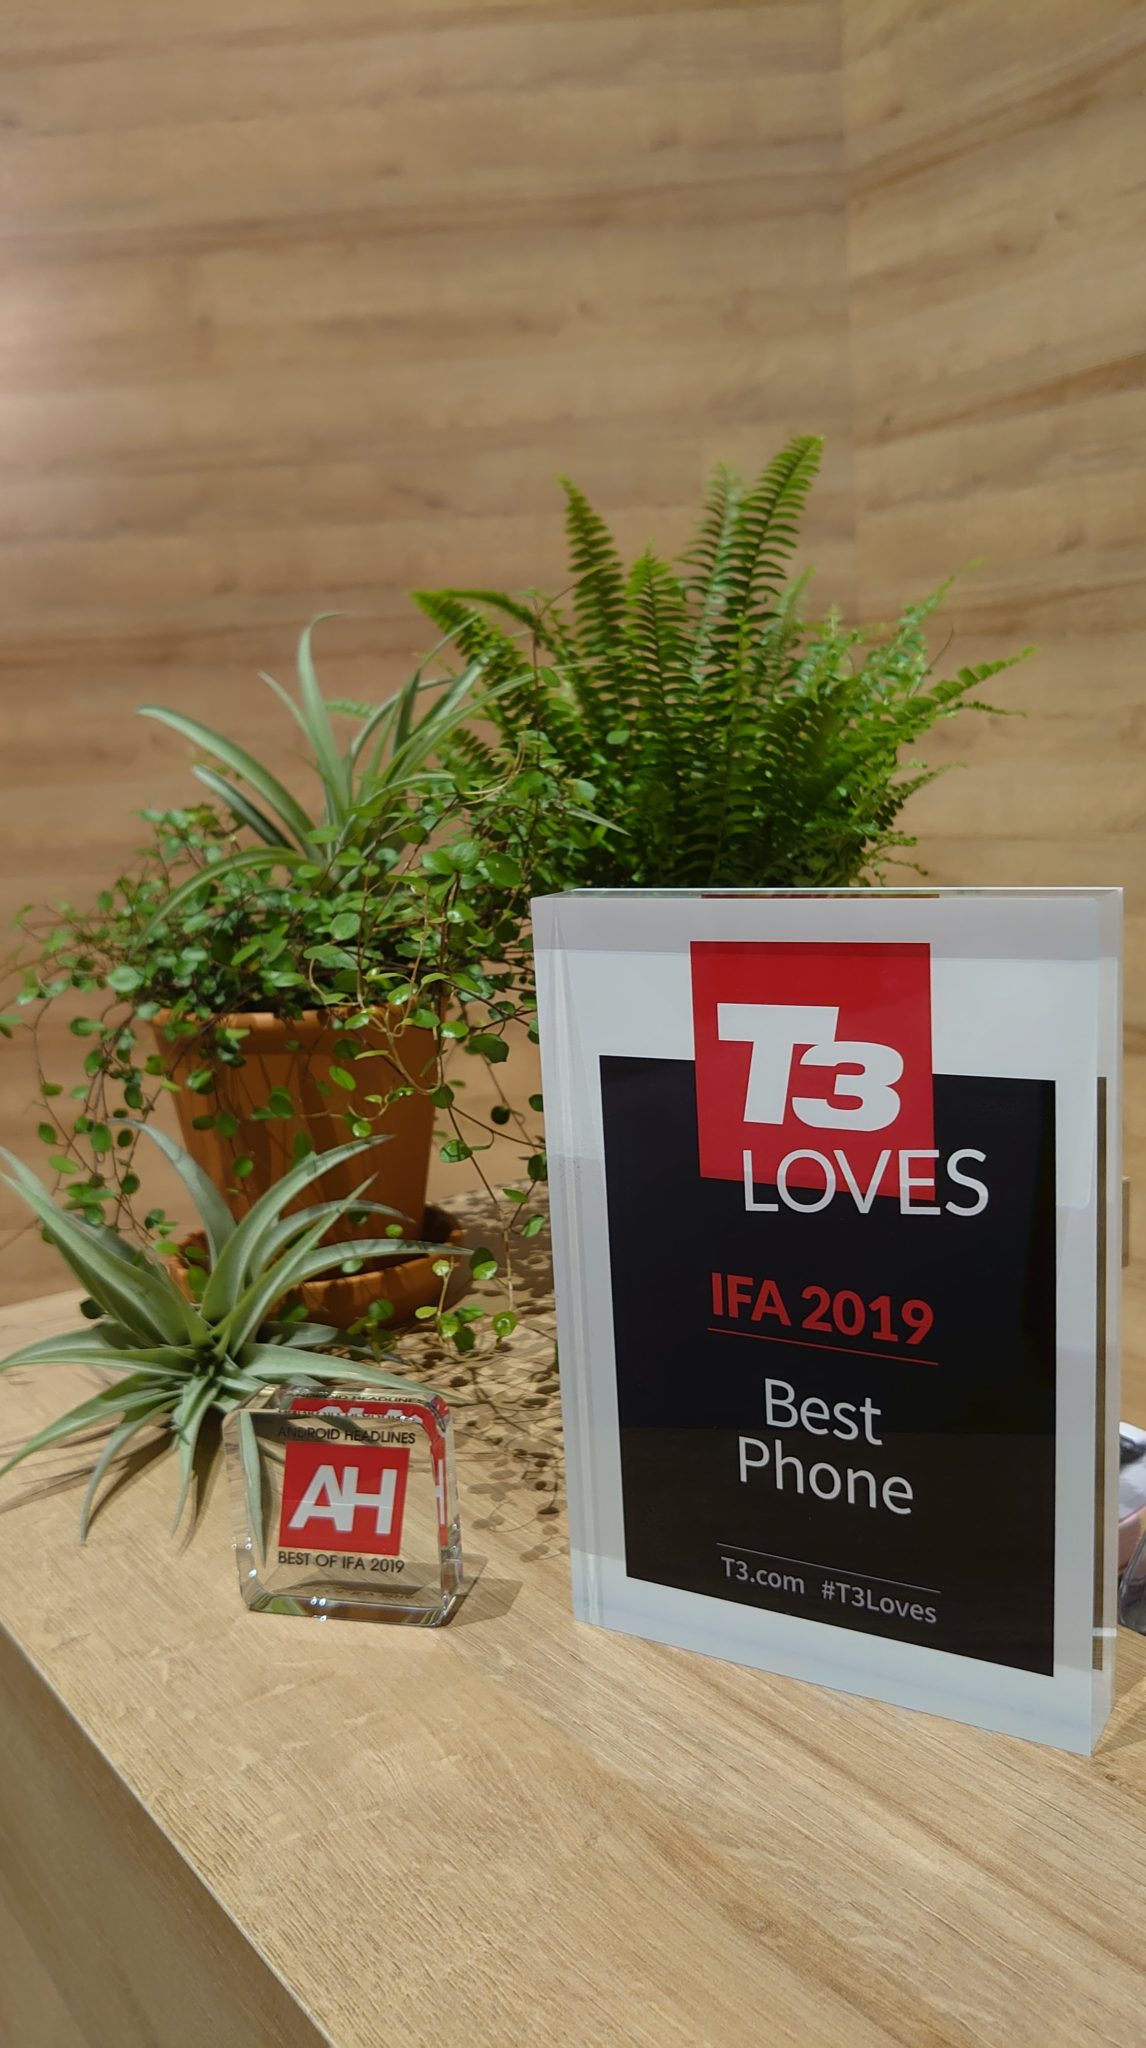 “IFA 2019 Best Phone Award” – and many others!